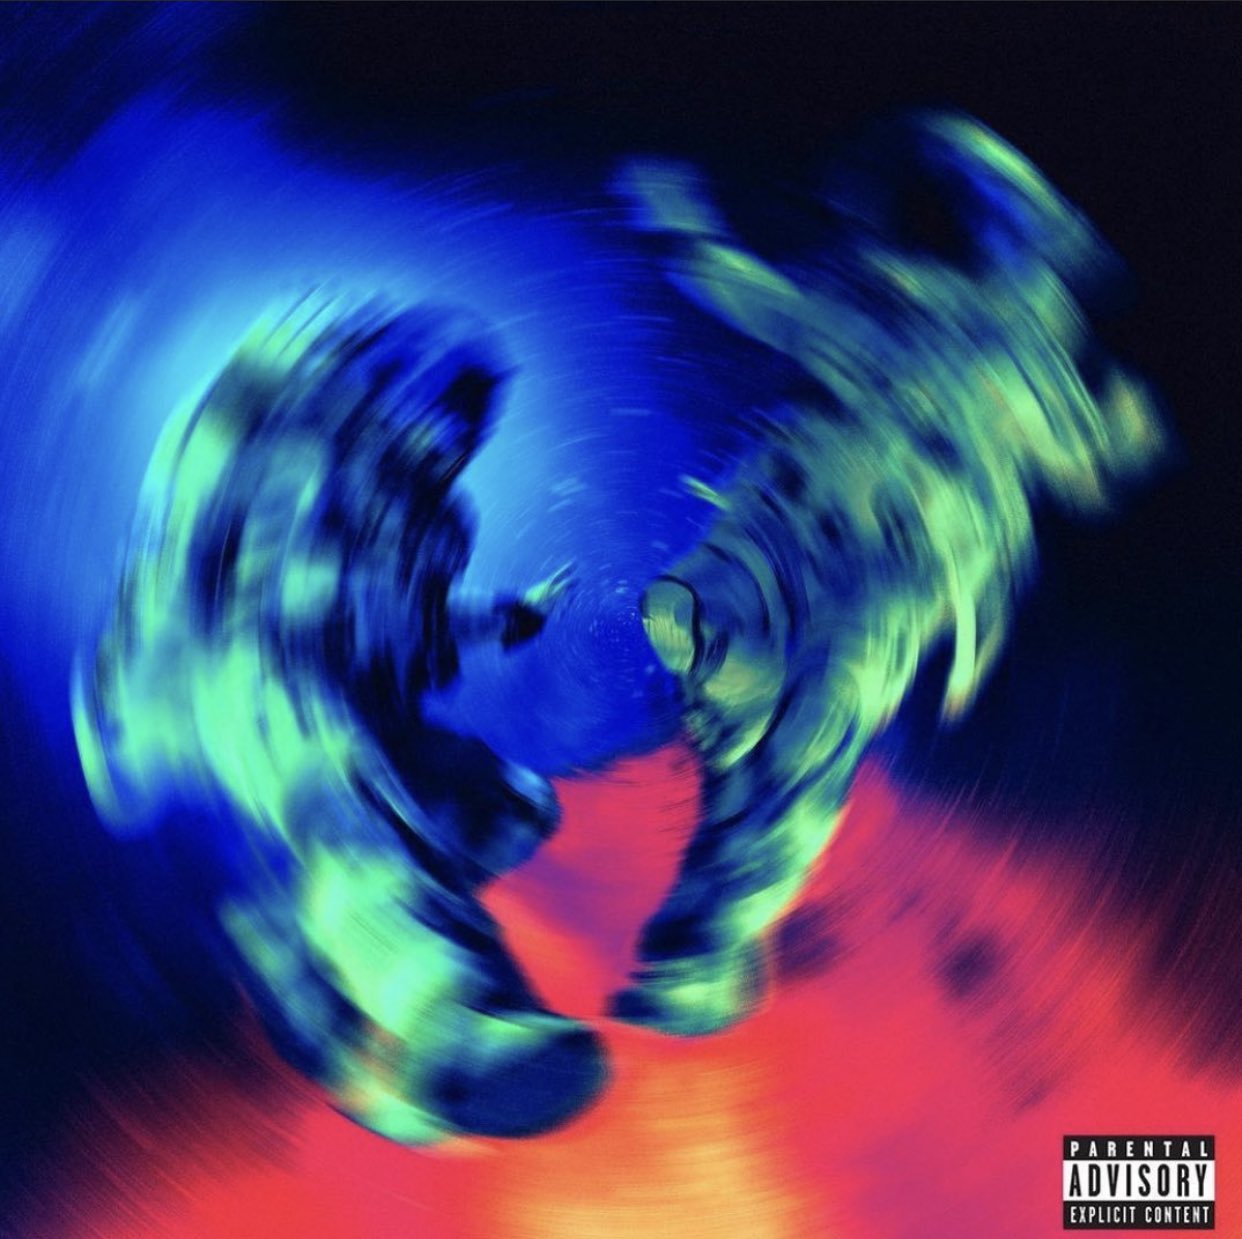 Future and Lil Uzi Vert Take Fans On a Ride Through the Cosmos On ‘Pluto x Baby Pluto’